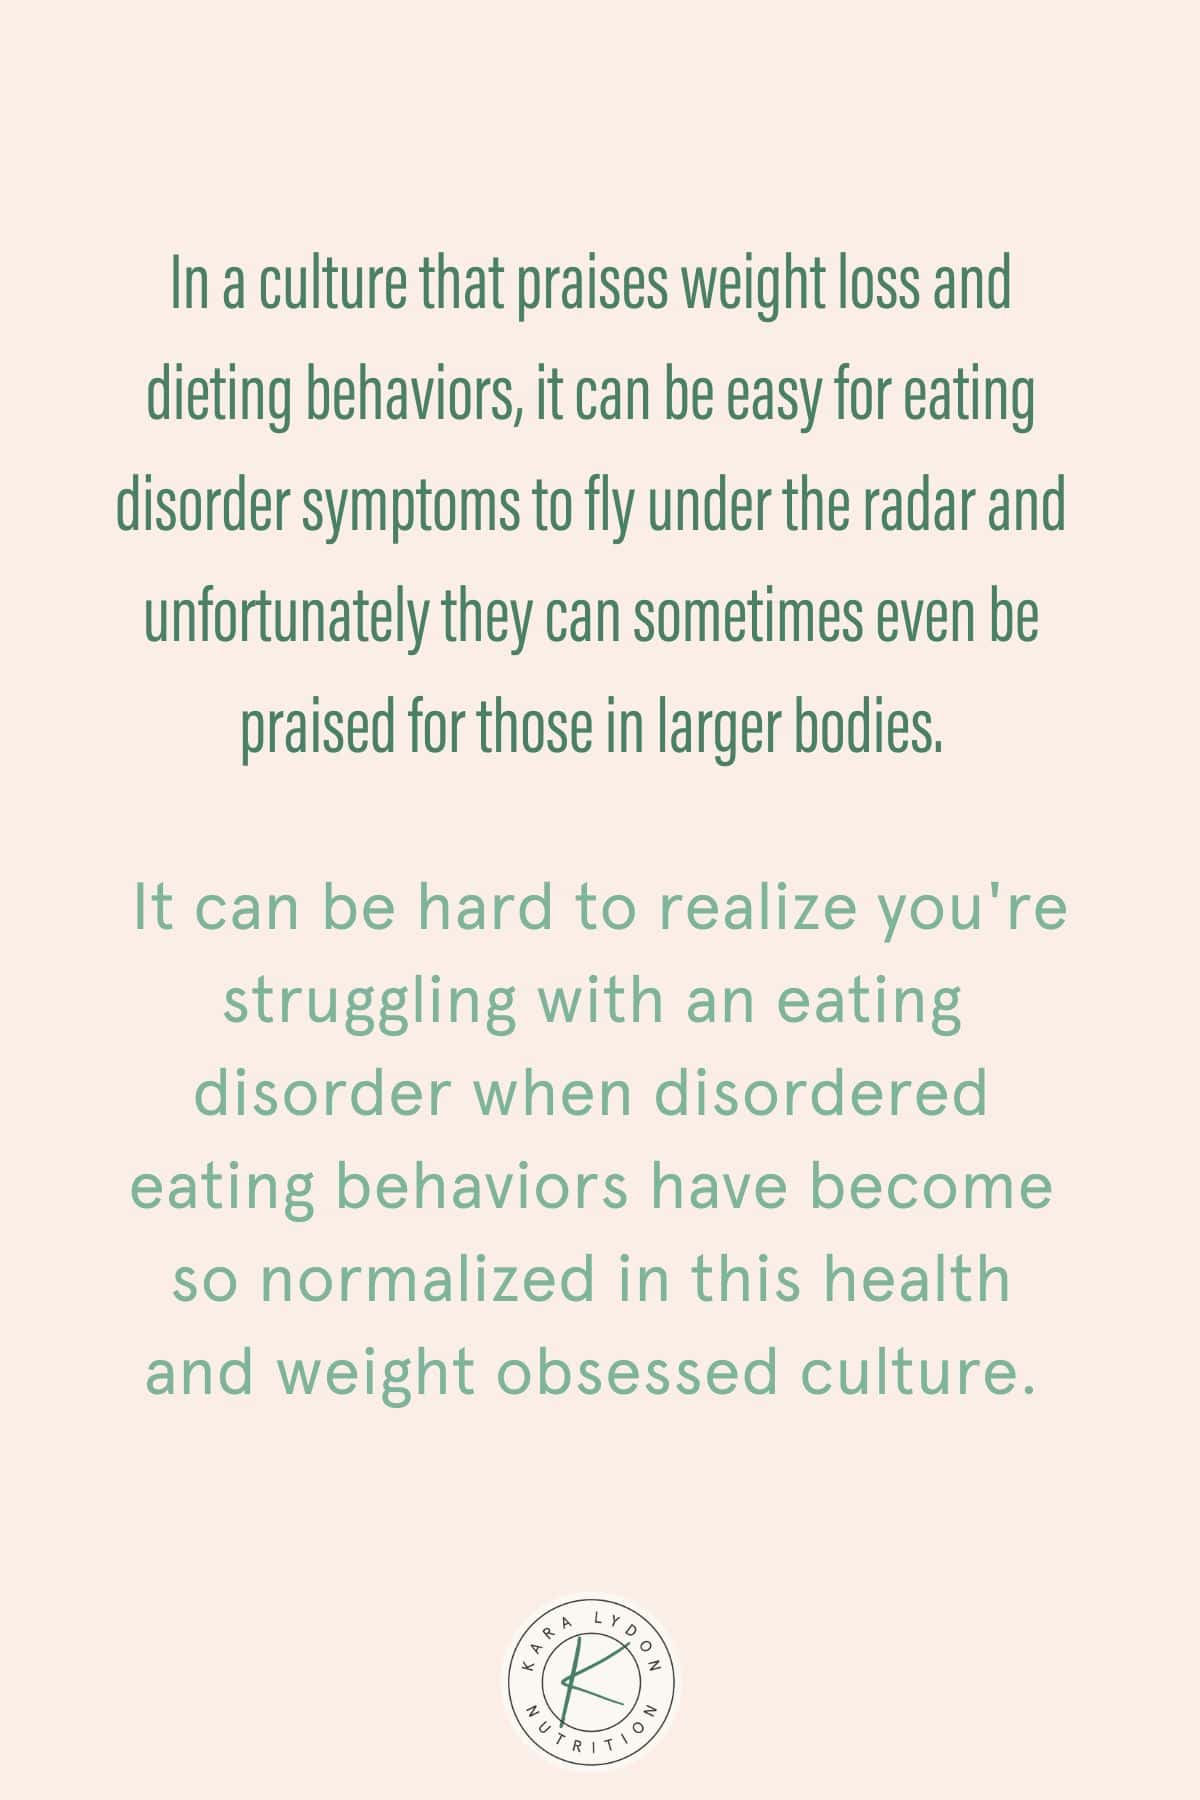 Graphic with quote In a culture that praises weight loss and dieting behaviors it can be easy for eating disorder symptoms to fly under the radar and unfortunately they can sometimes even be praised for those in larger bodies It can be hard to realize you're struggling with an eating disorder when disordered eating behaviors have become so normalized in this health and weight obsessed culture."